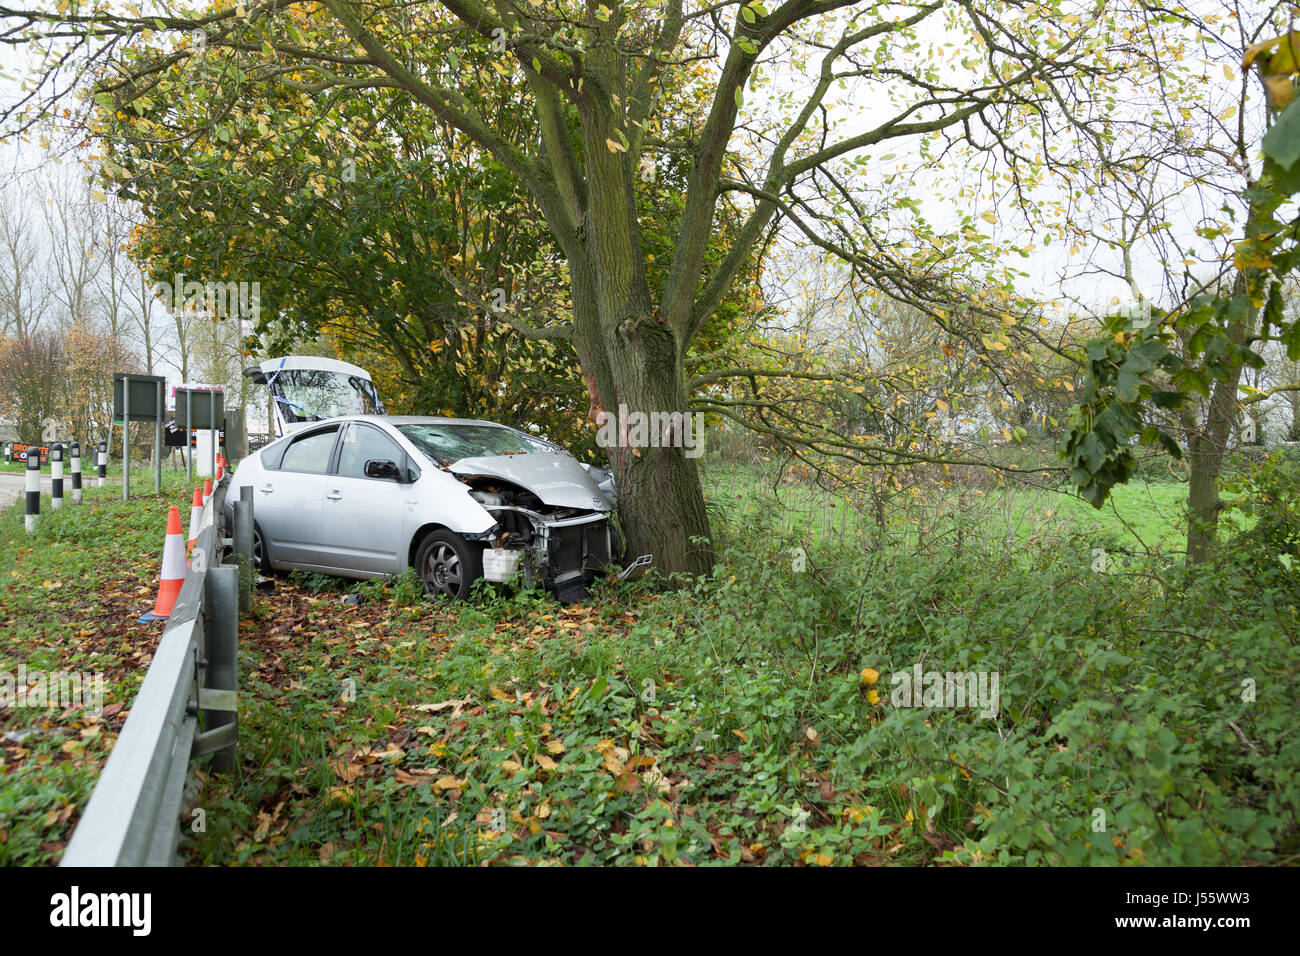 Silver Toyota Prius road traffic accident car crash into a tree Stock Photo